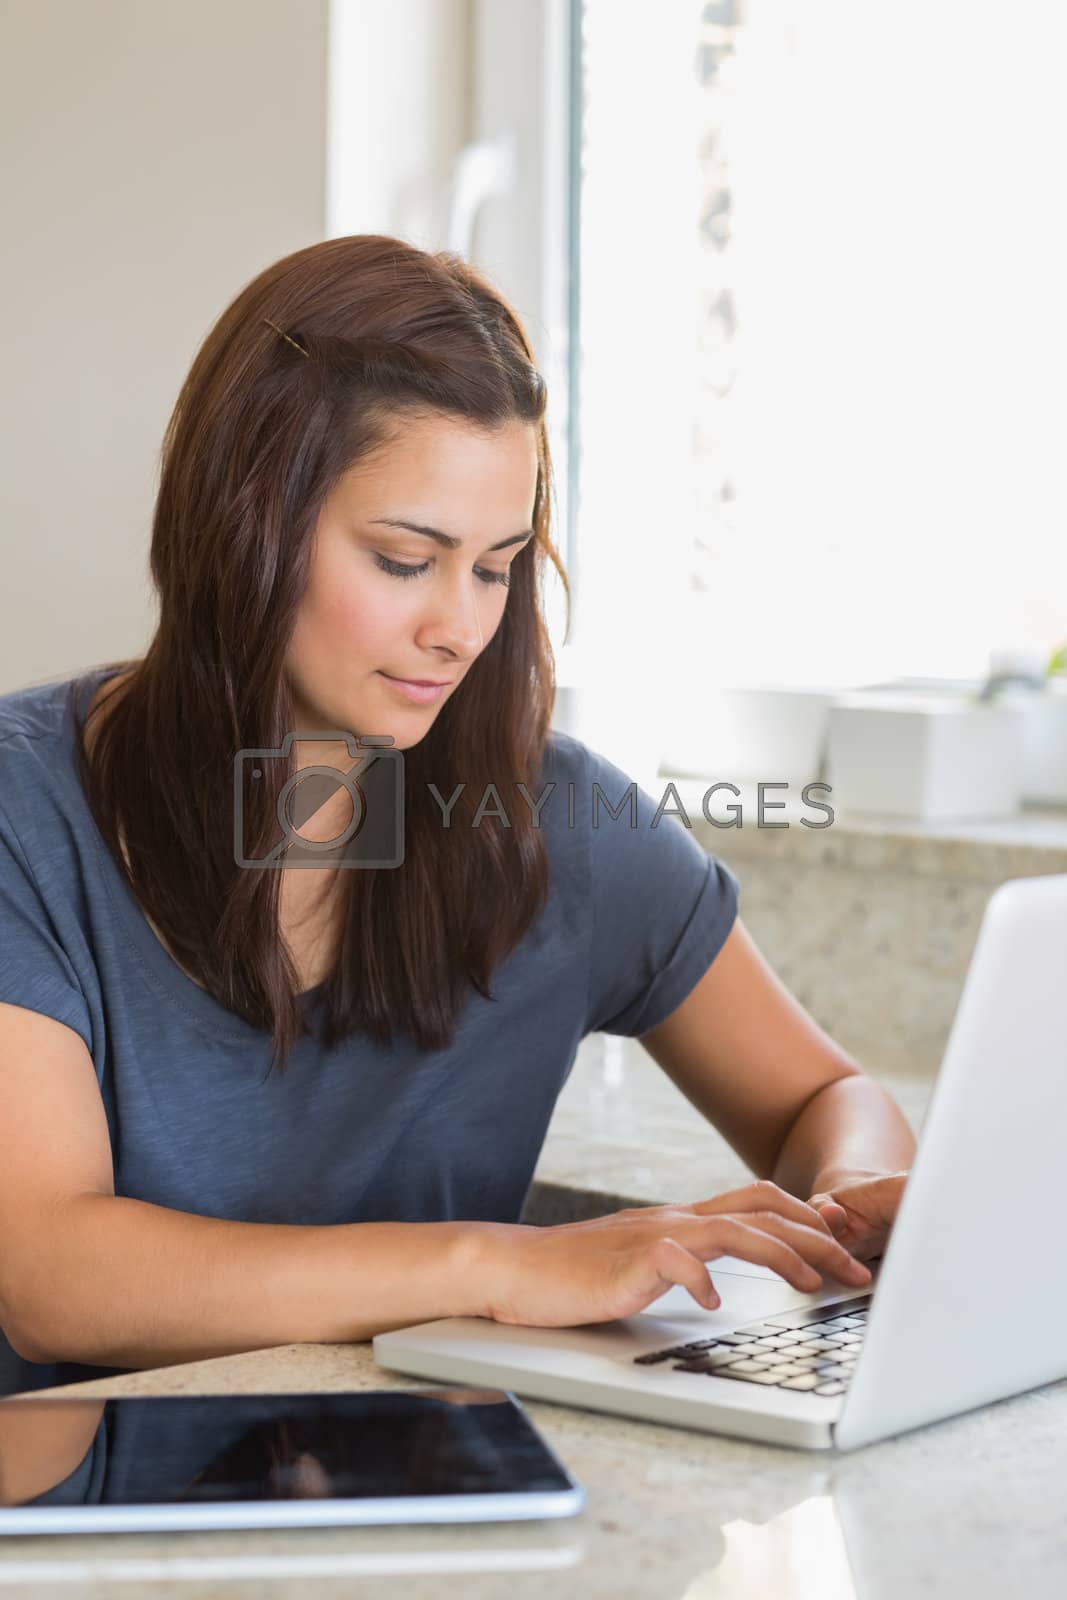 Royalty free image of Woman using laptop by Wavebreakmedia